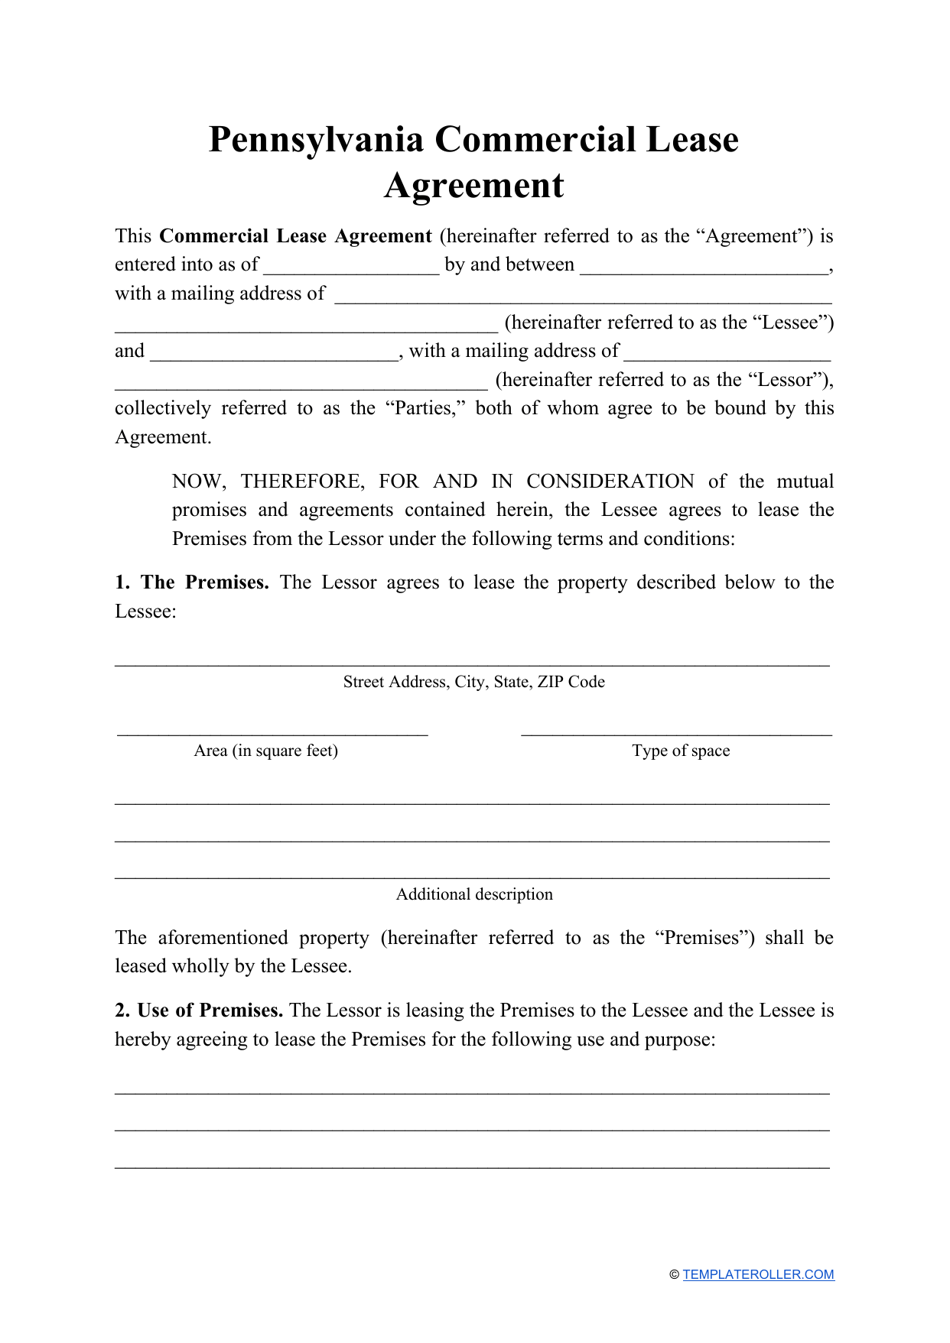 Commercial Lease Agreement Template - Pennsylvania, Page 1